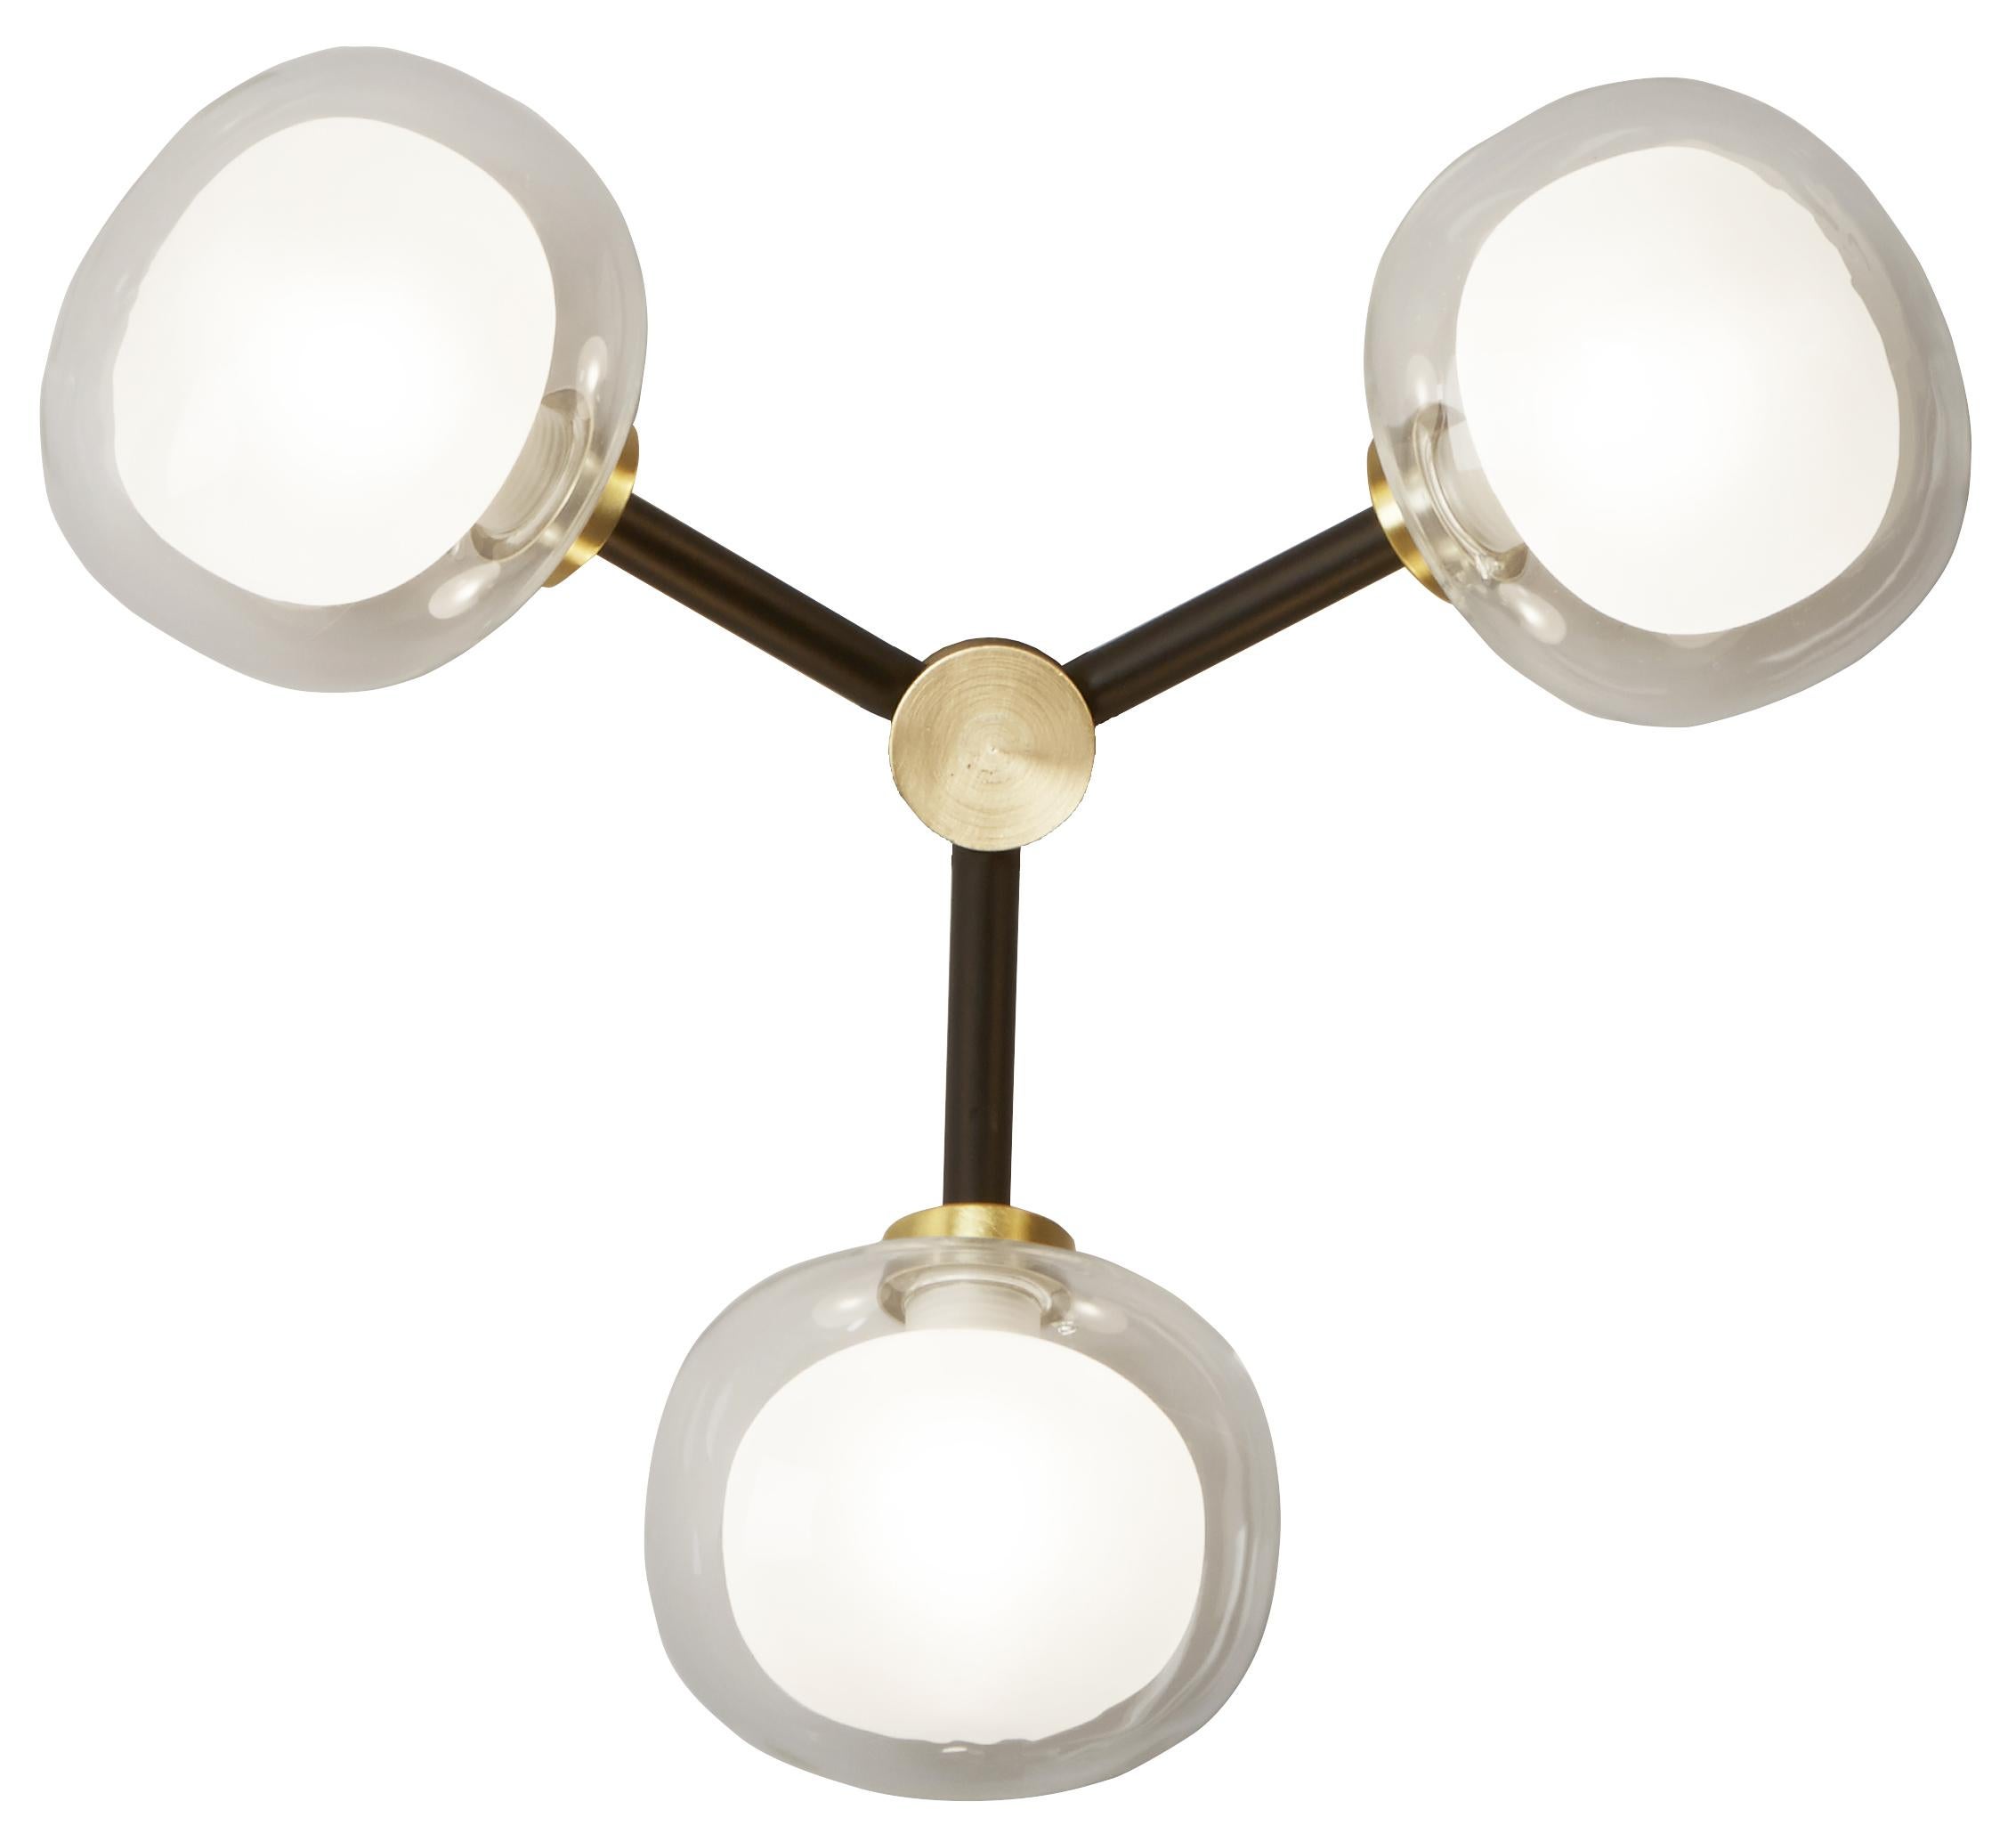 Organic Modern Contemporary Wall Lamp Nabila 552.73 by TOOY, Brass, Clear Glass For Sale